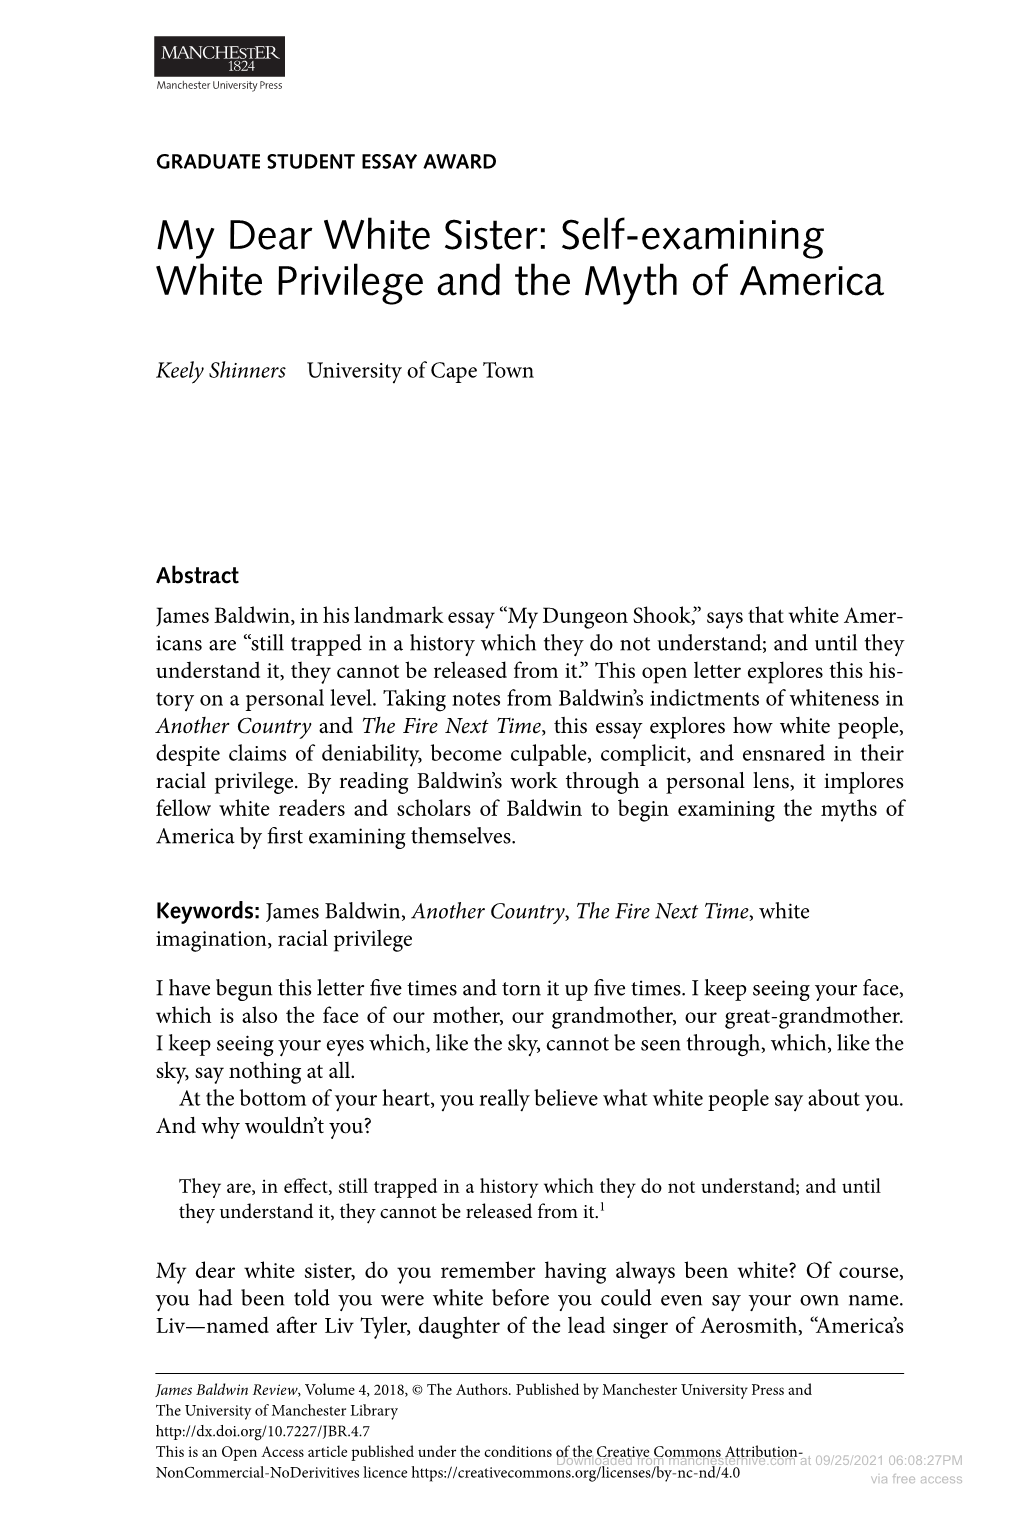 Self-Examining White Privilege and the Myth of America